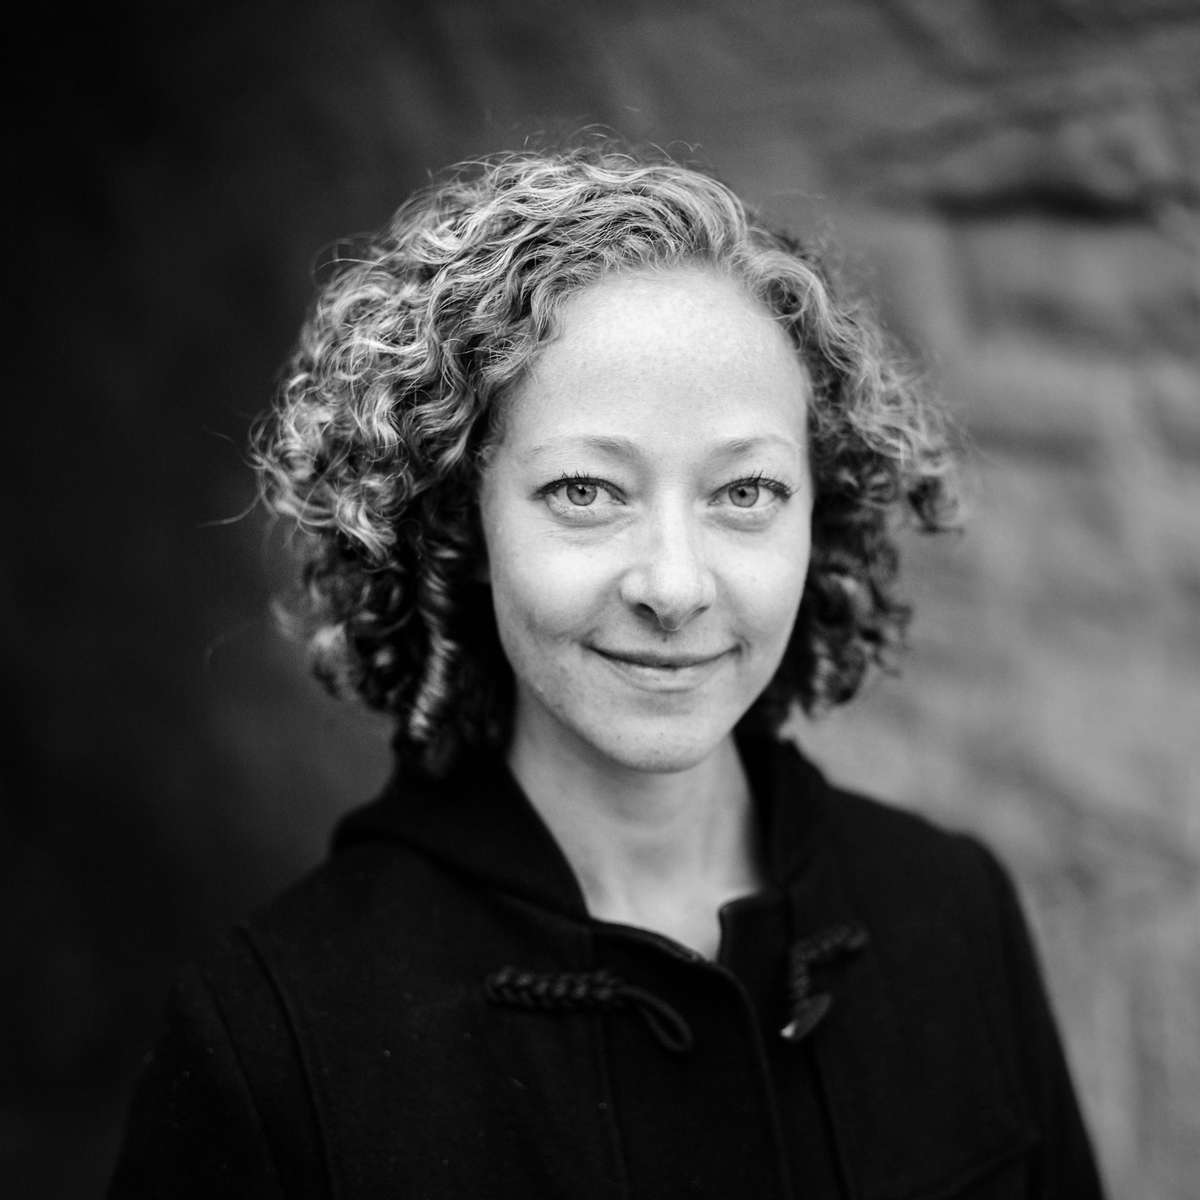 Author Ramona Ausubel grew up in Santa Fe, New Mexico. She has released two novels and two story collections.